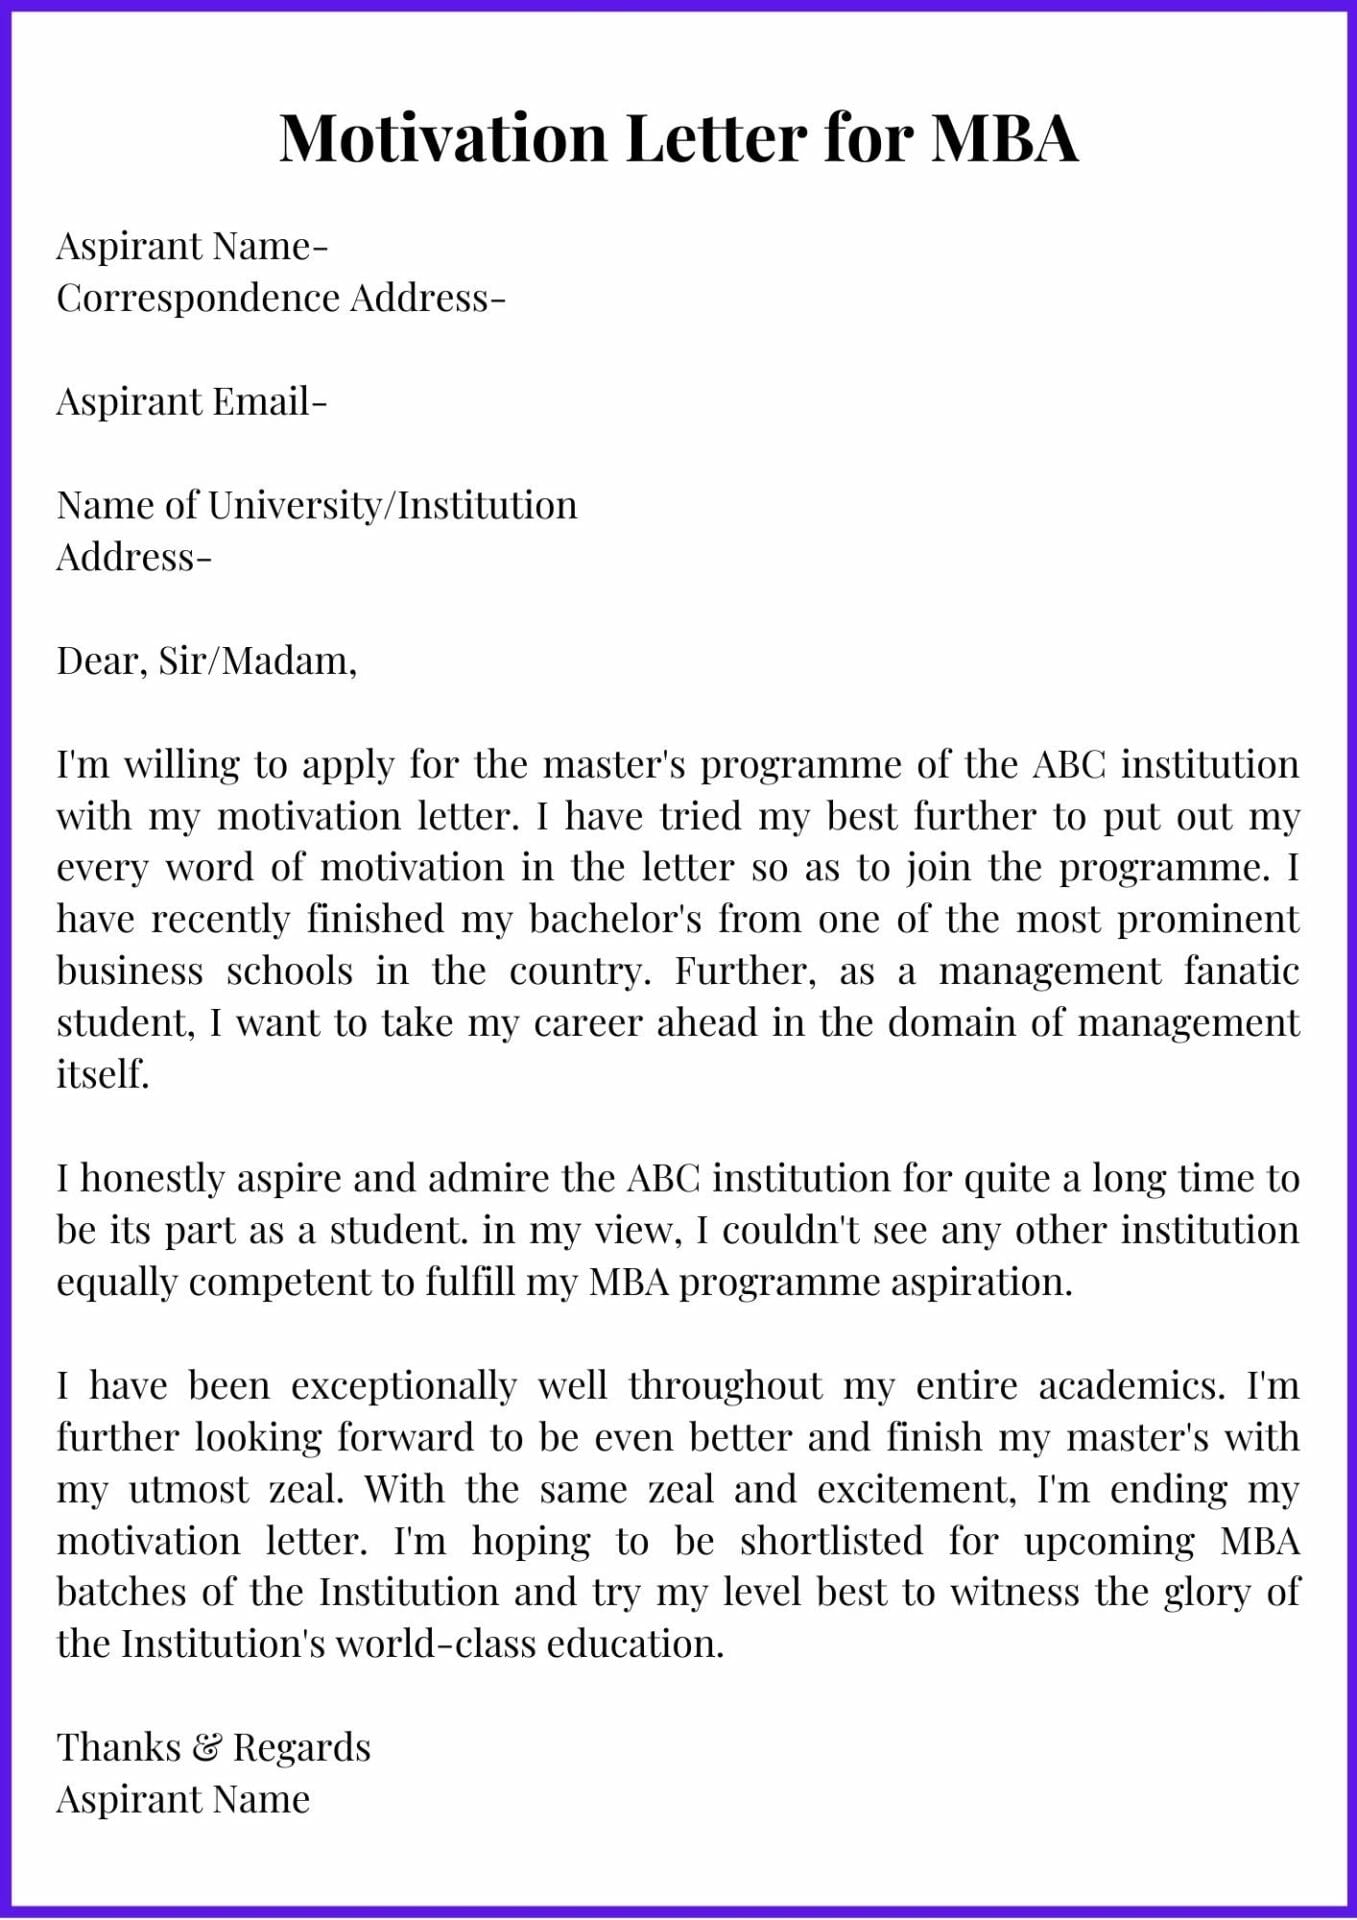 sample-motivation-letter-for-mba-with-example-template